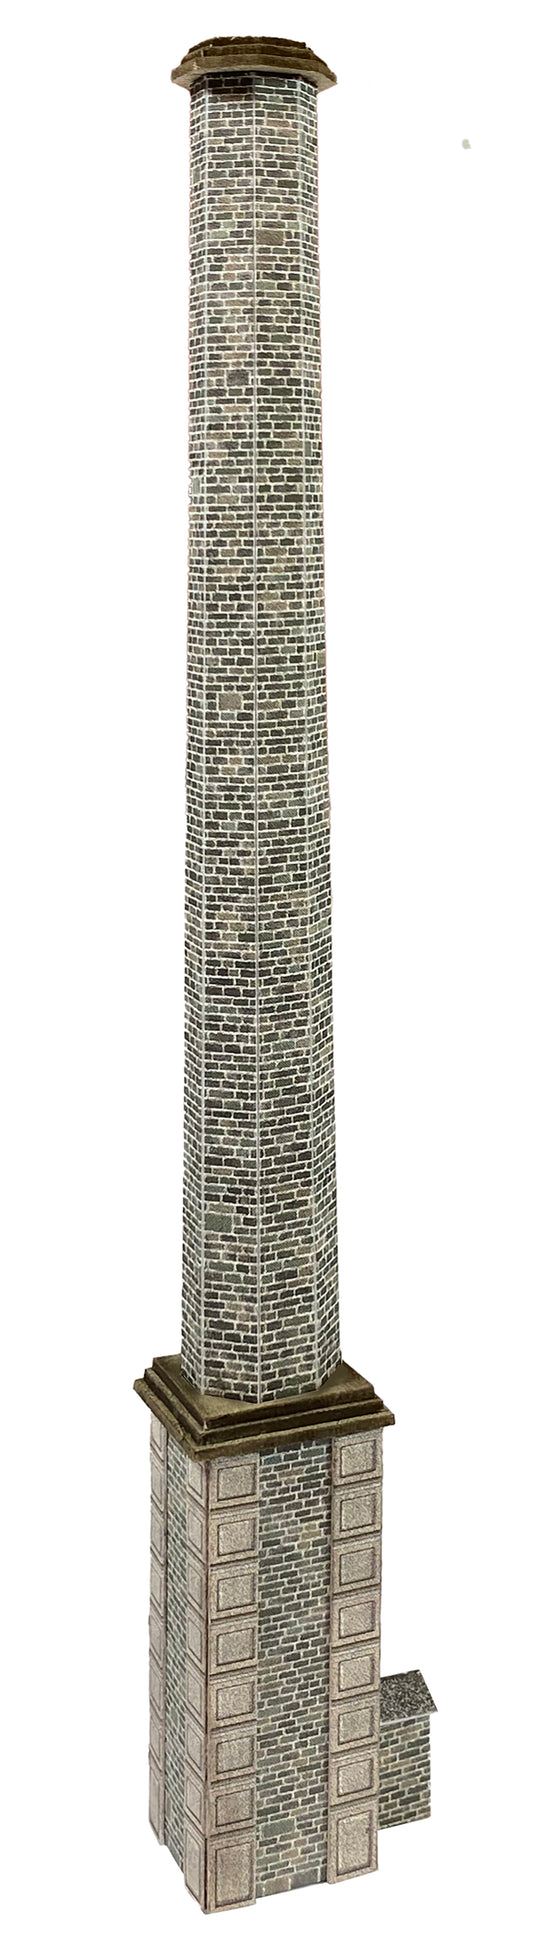 Metcalfe PN991 - Old Mill Chimney Stack